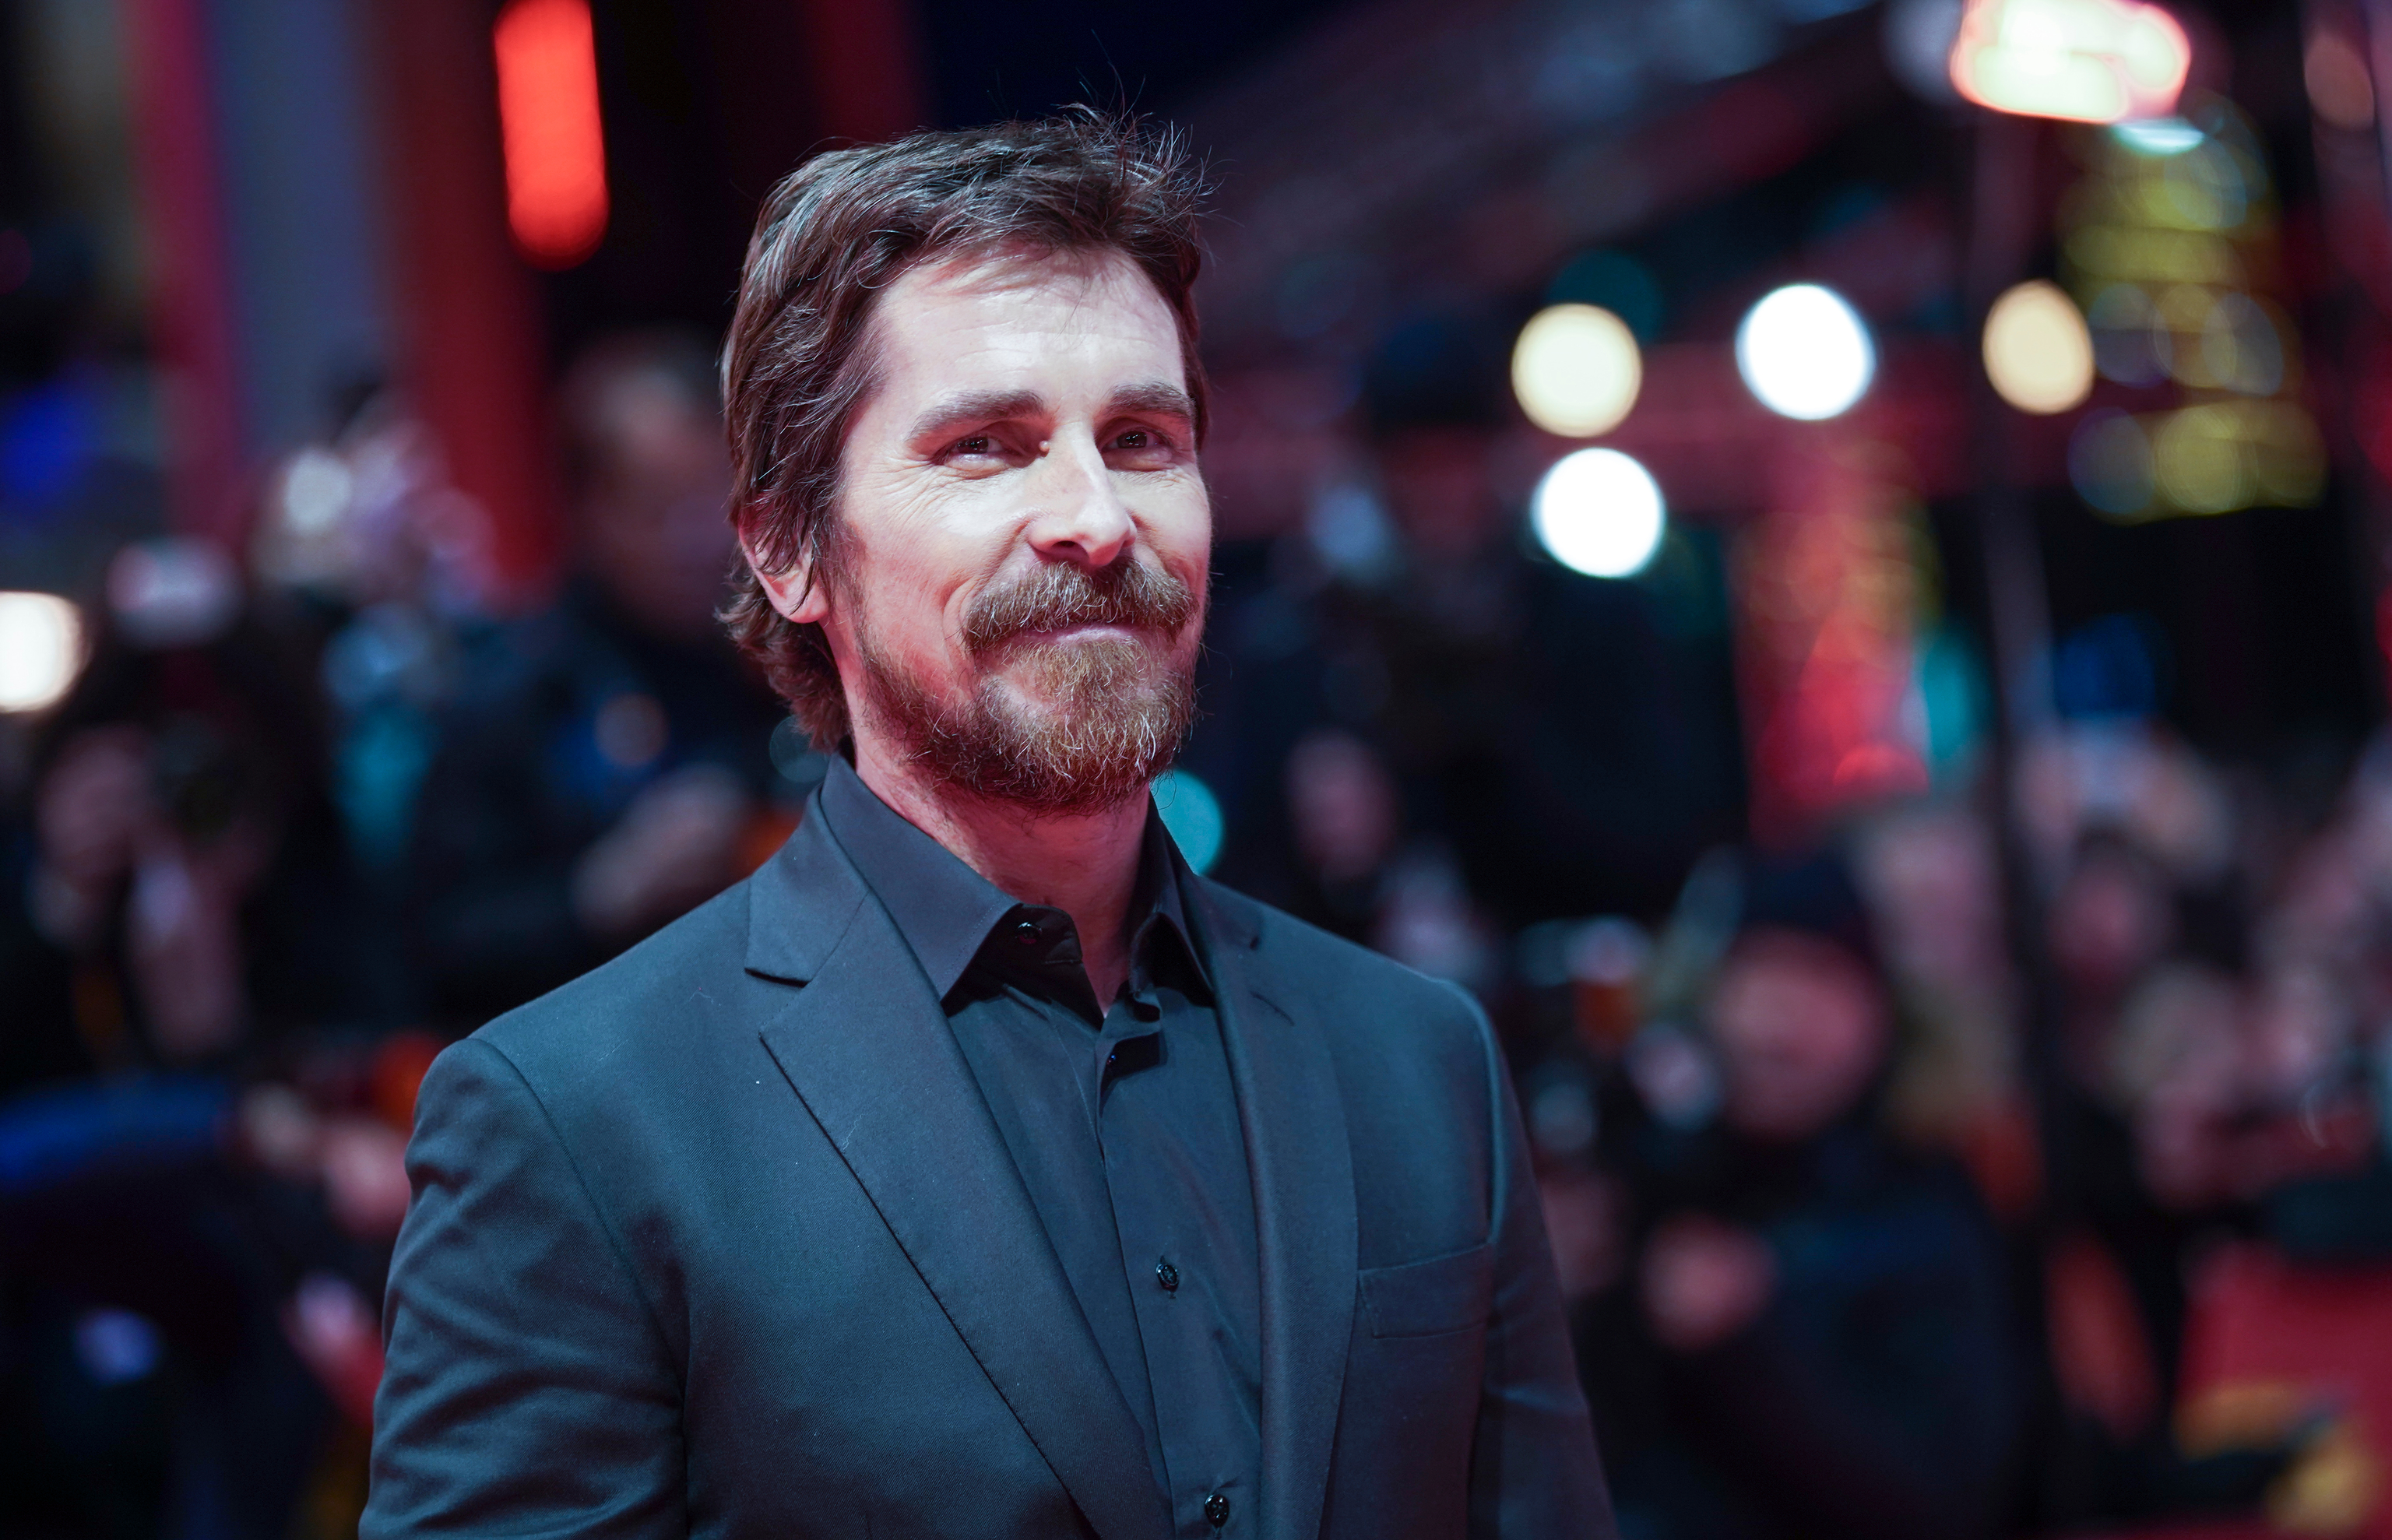 Christian Bale at the 69th Berlinale in February 2019.